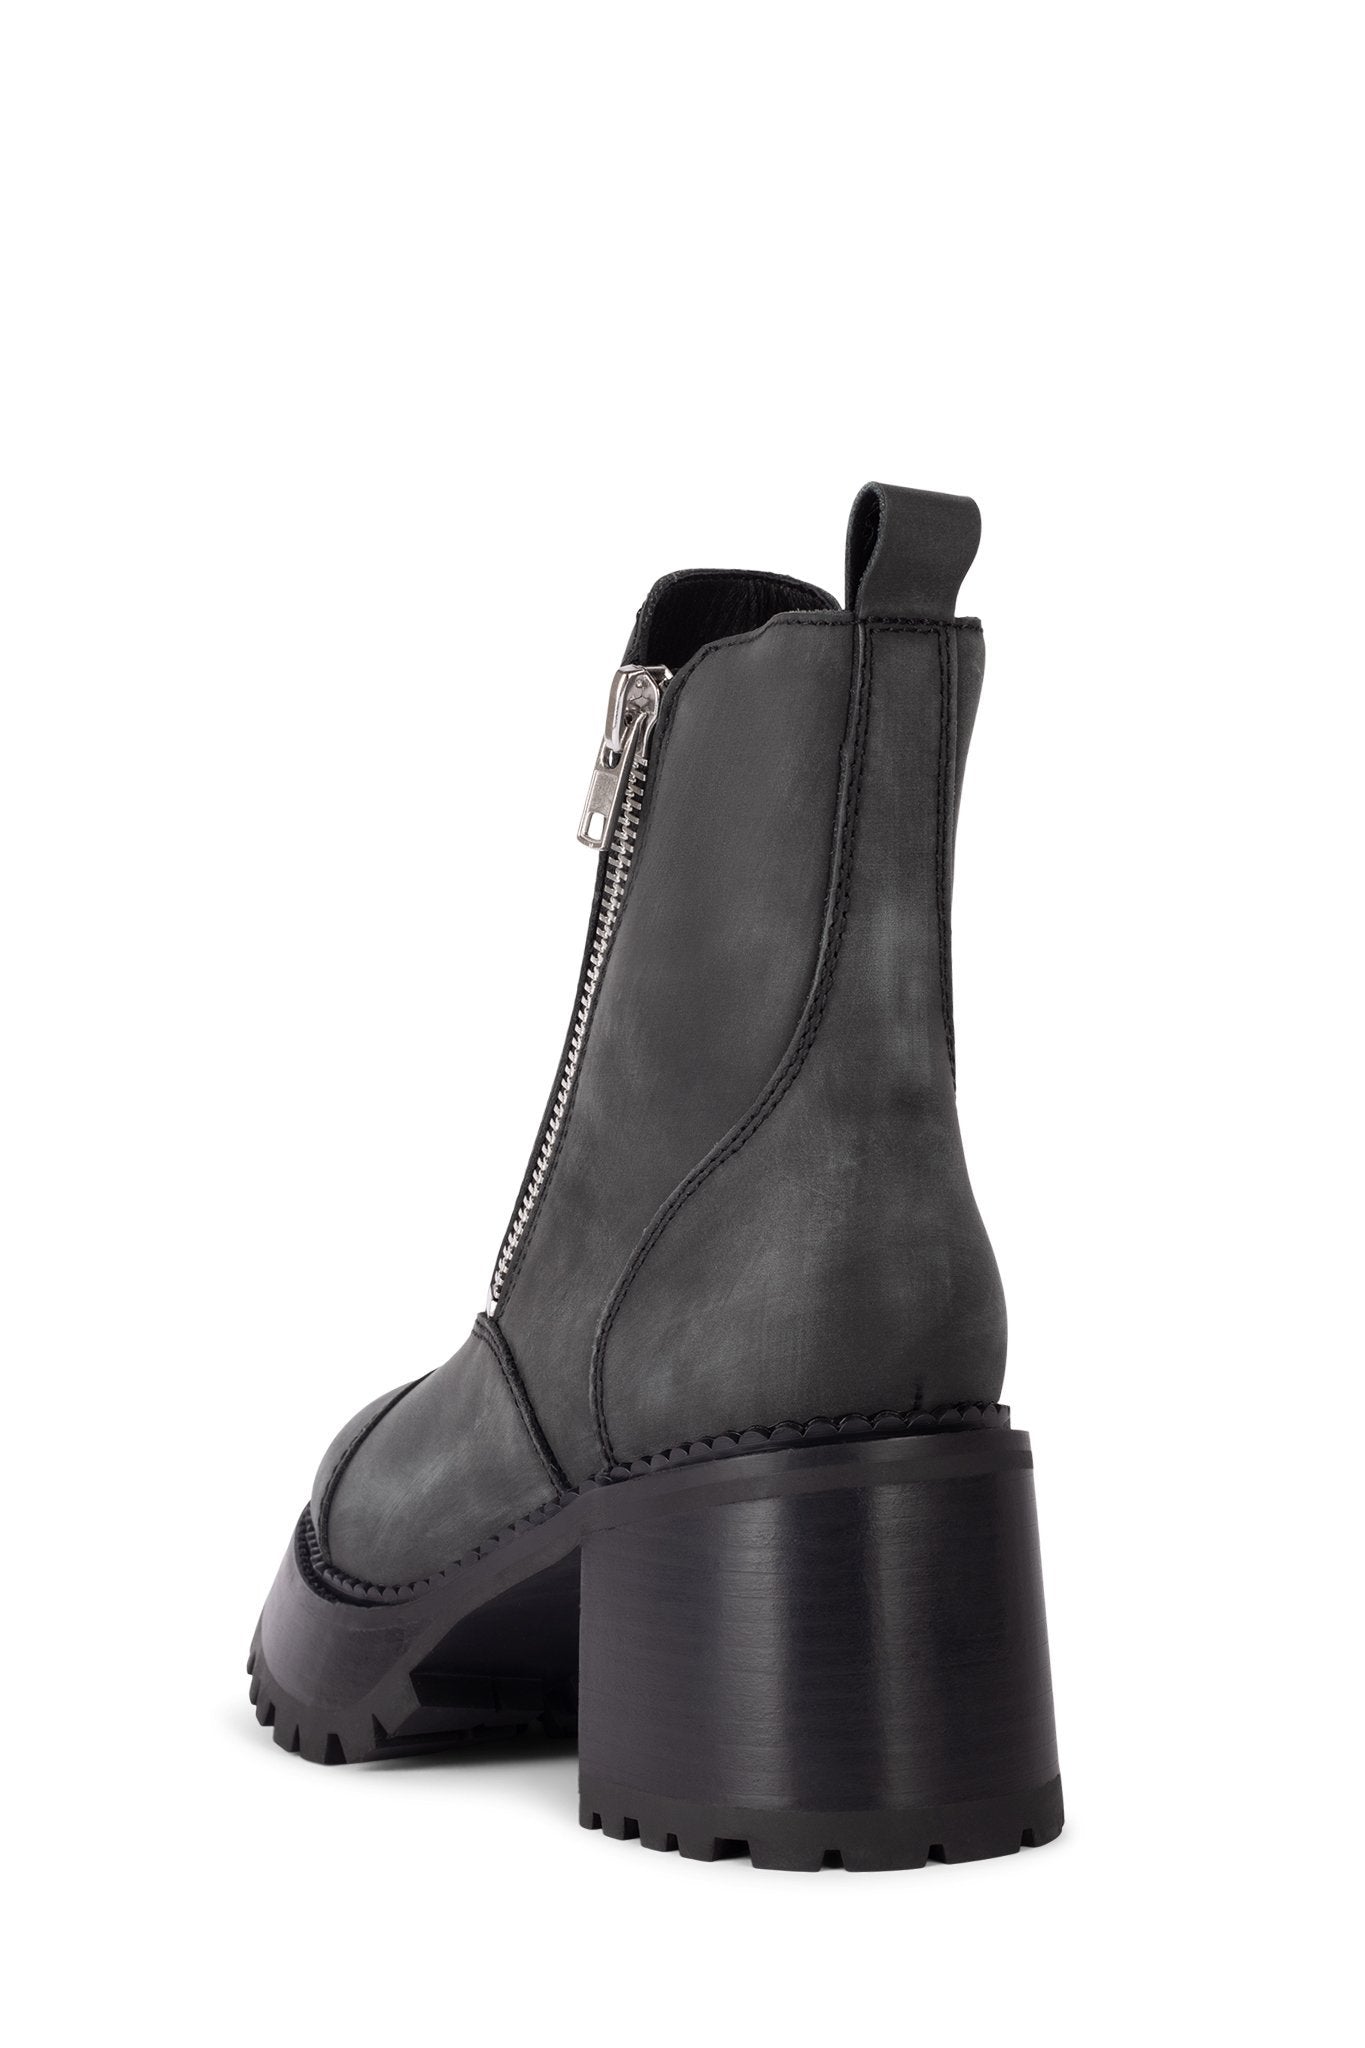 Stradivarius flat ankle boot with zipper in black